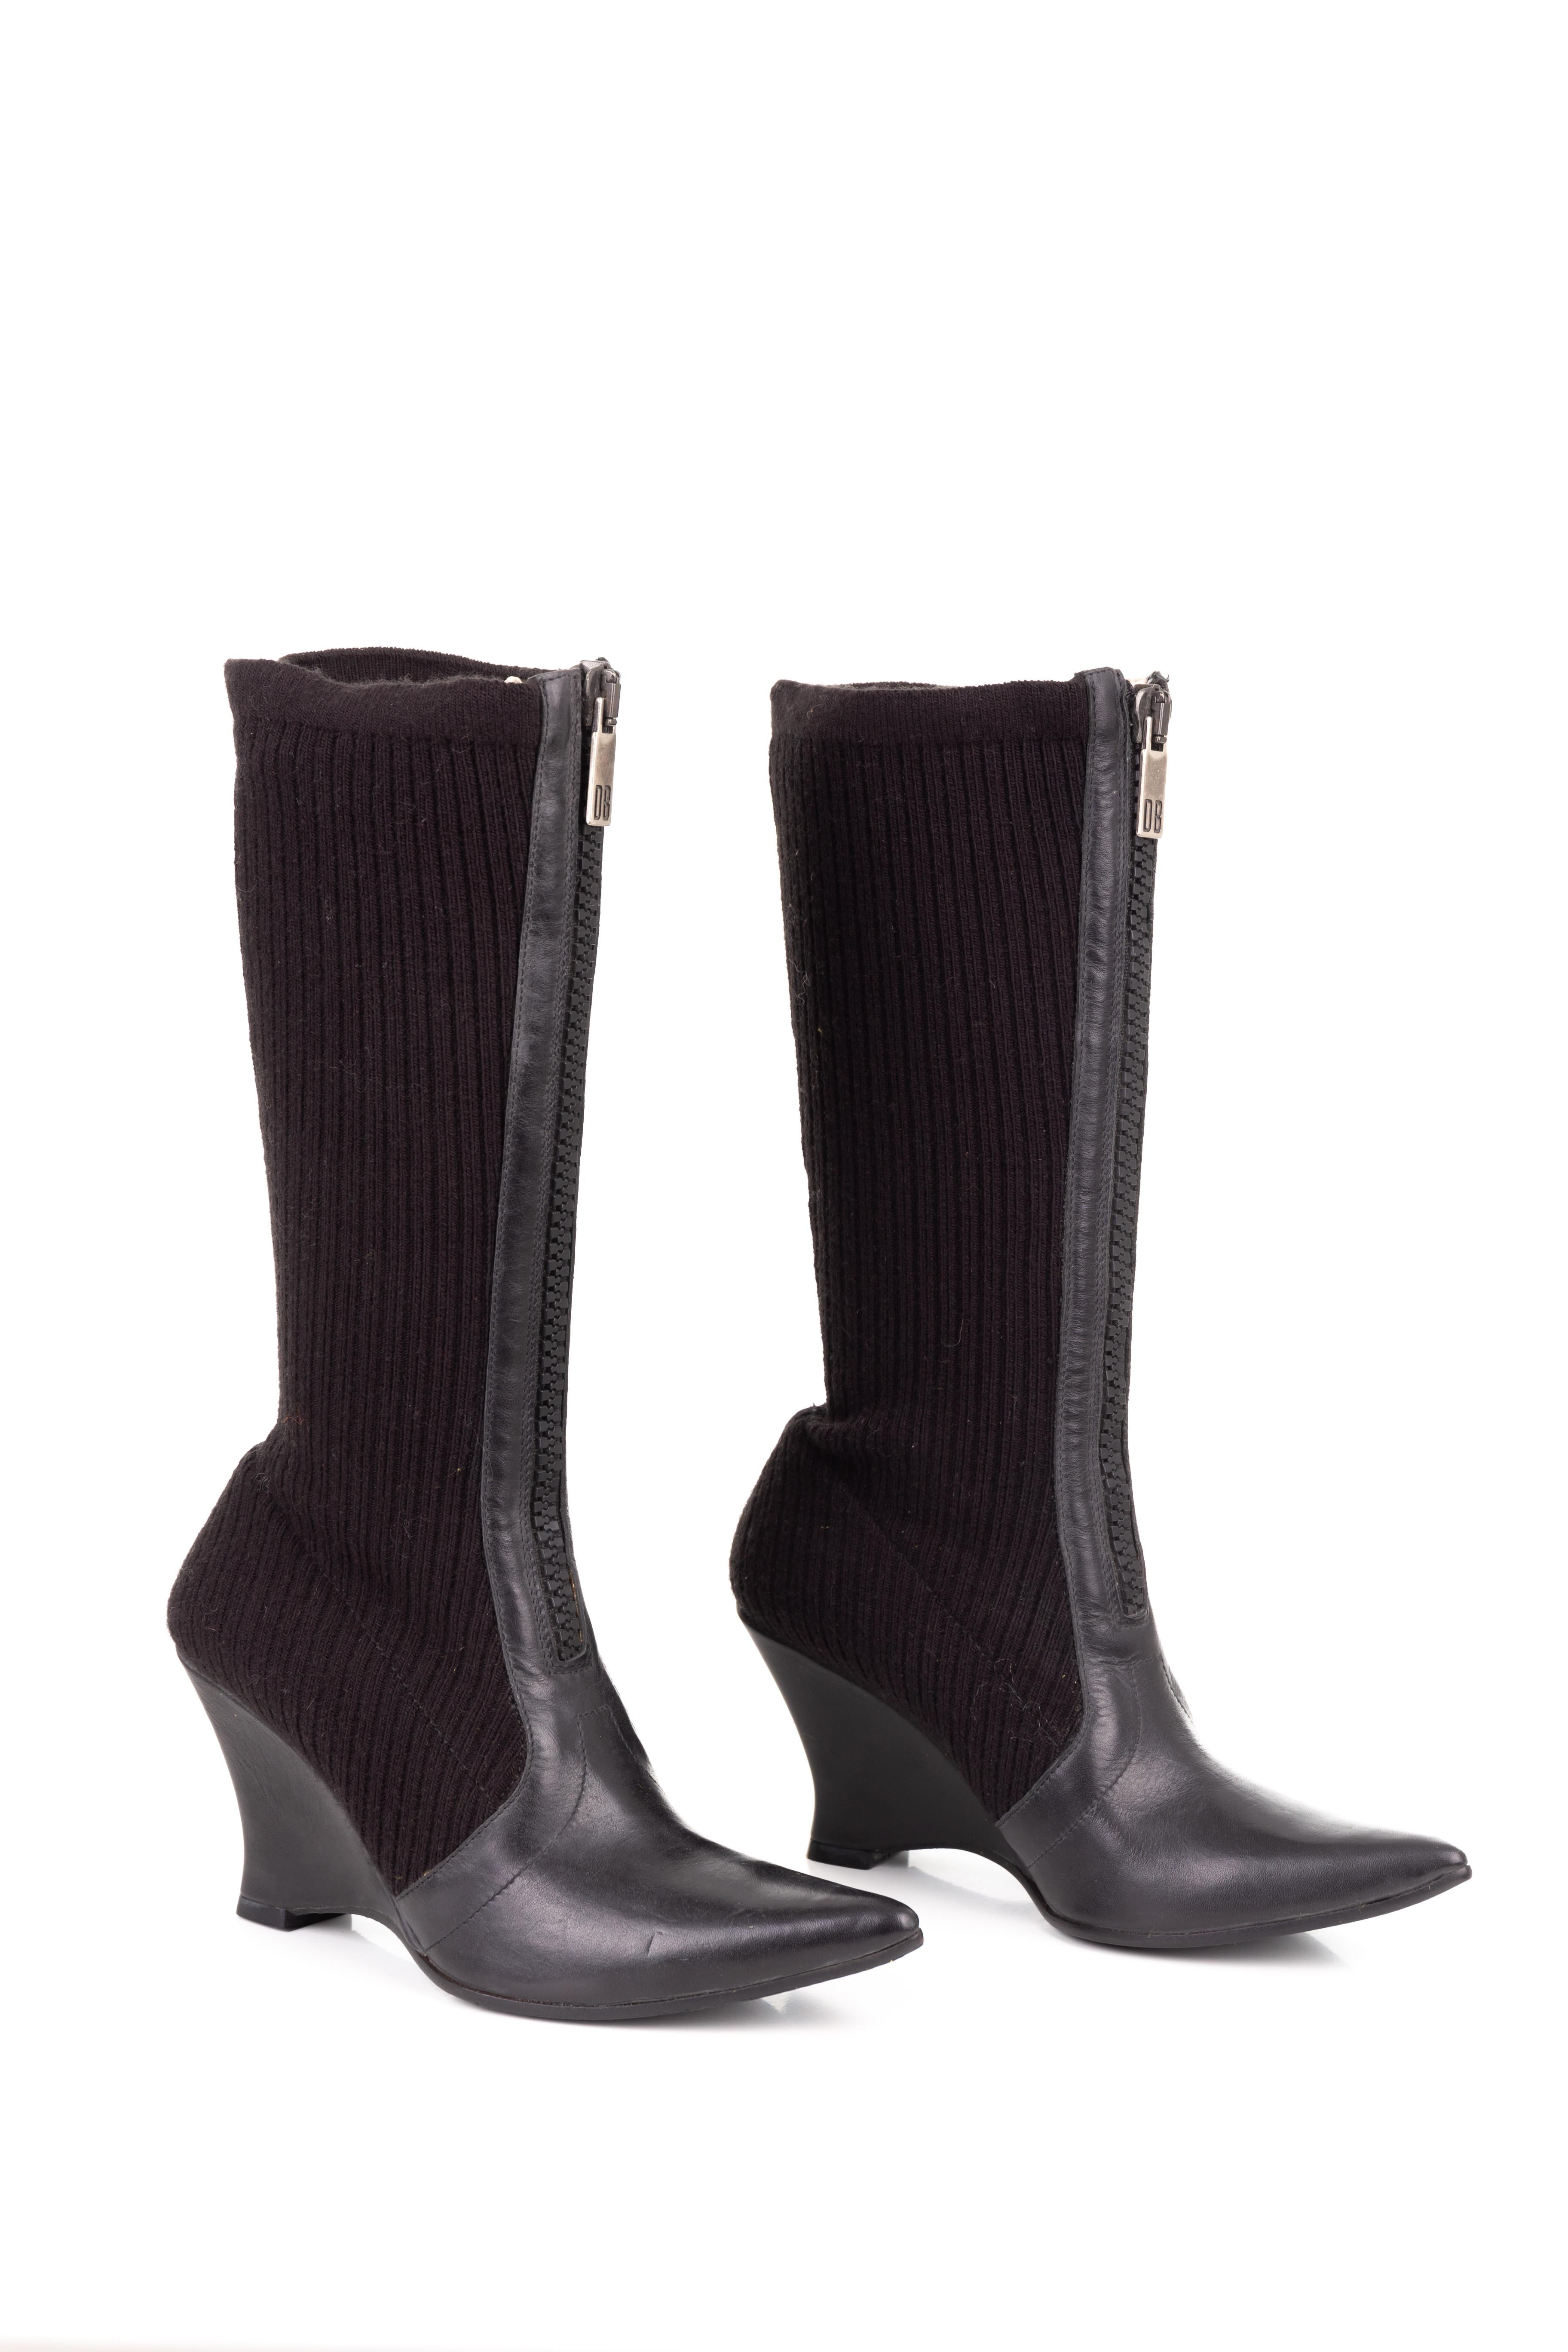 Dirk Bikkembergs F/W 2003 rib knit wedge boots In Excellent Condition For Sale In Rome, IT